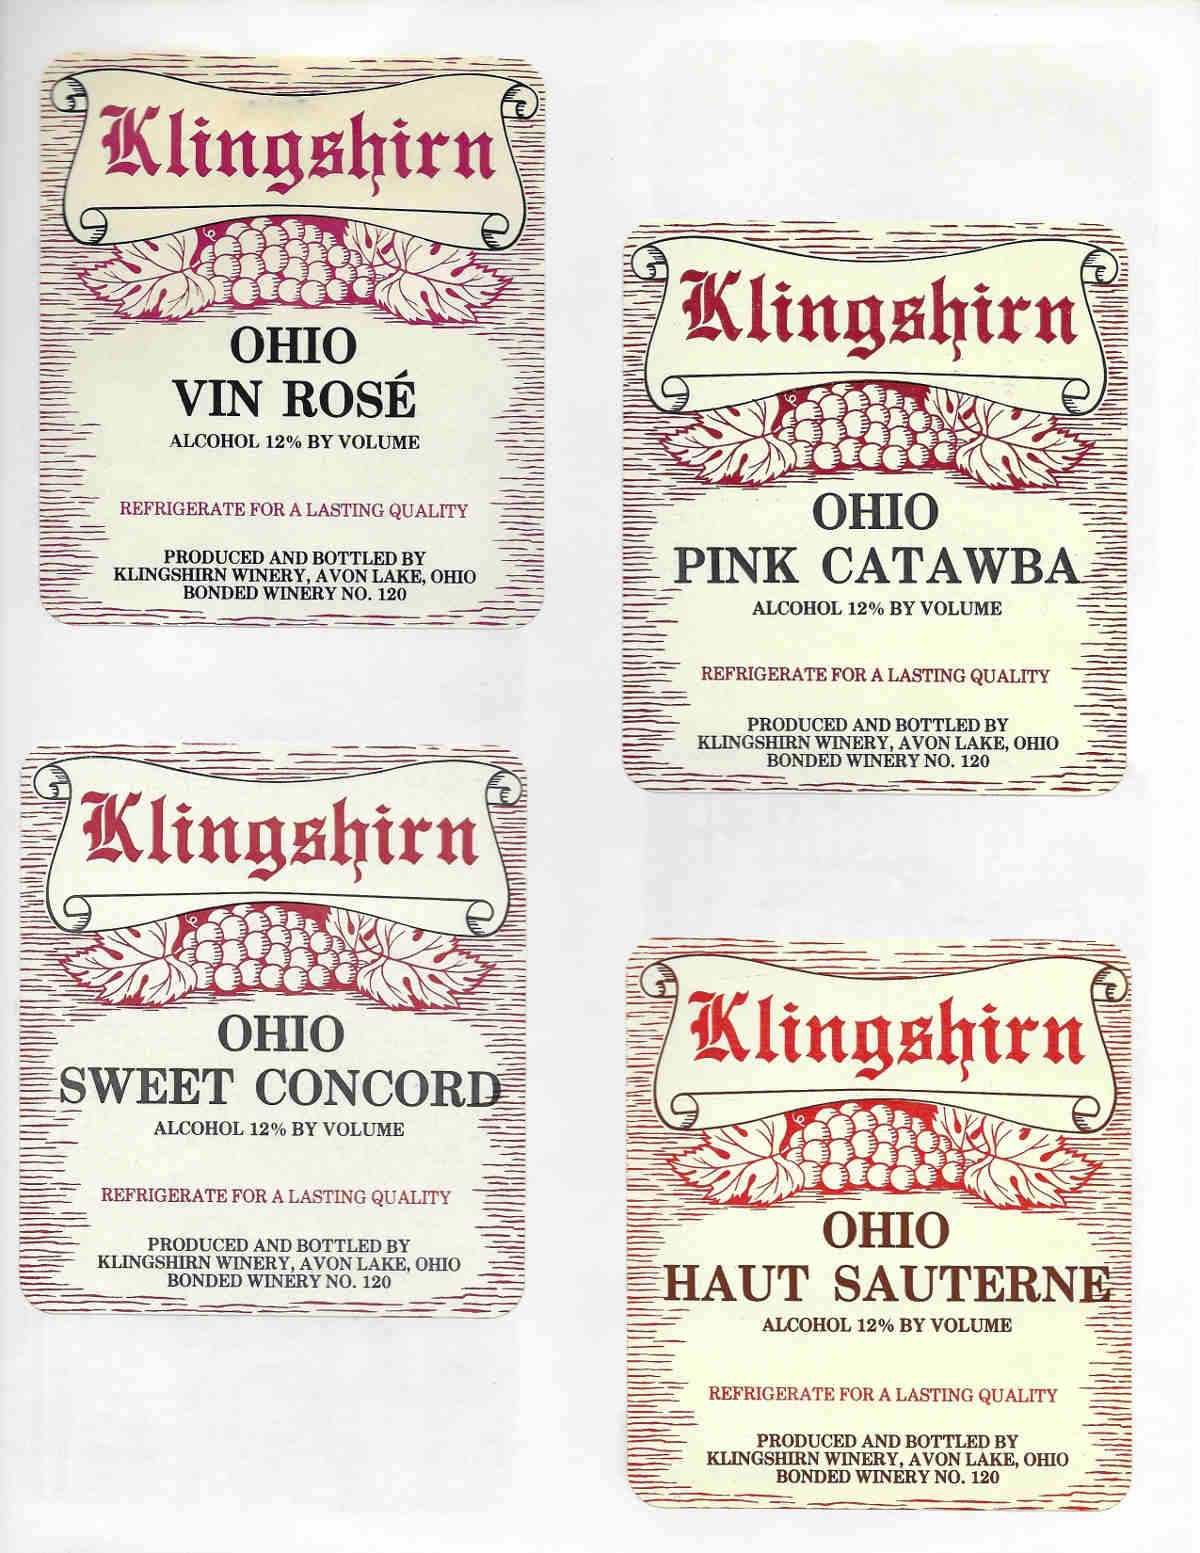 4 Klingshirn wine labels from the 1980s